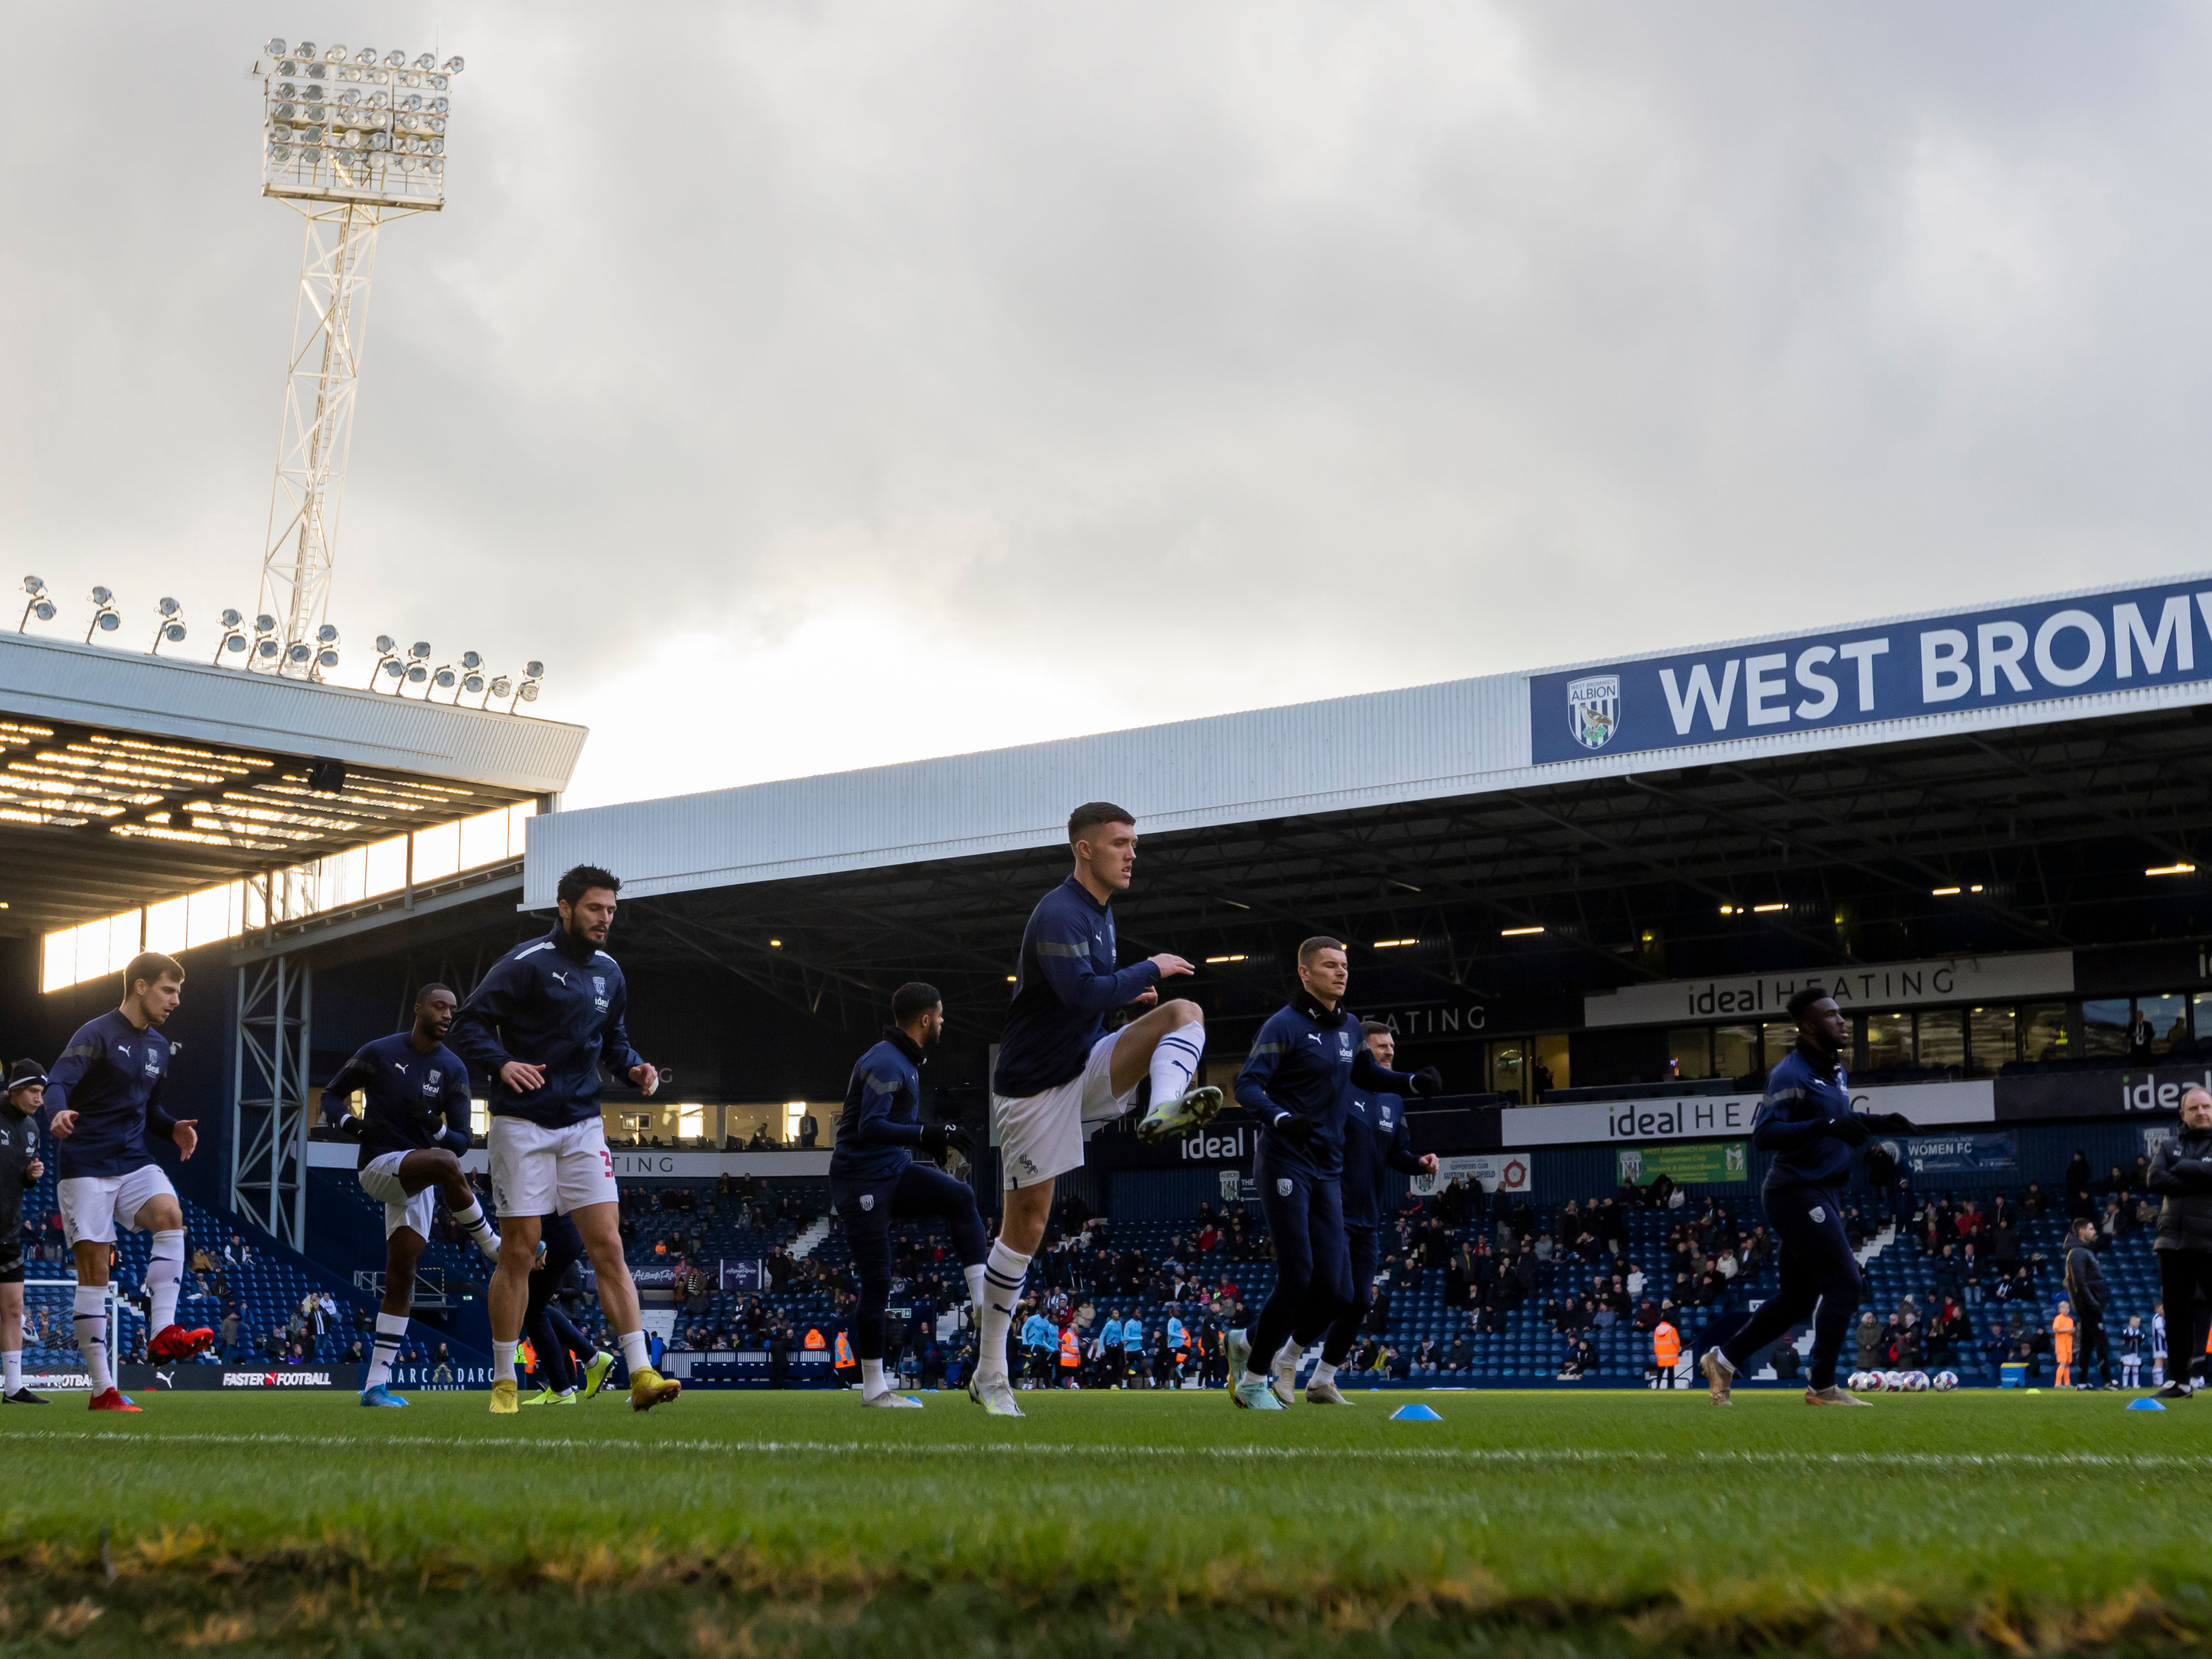 Albion players warm up before a game at The Hawthorns